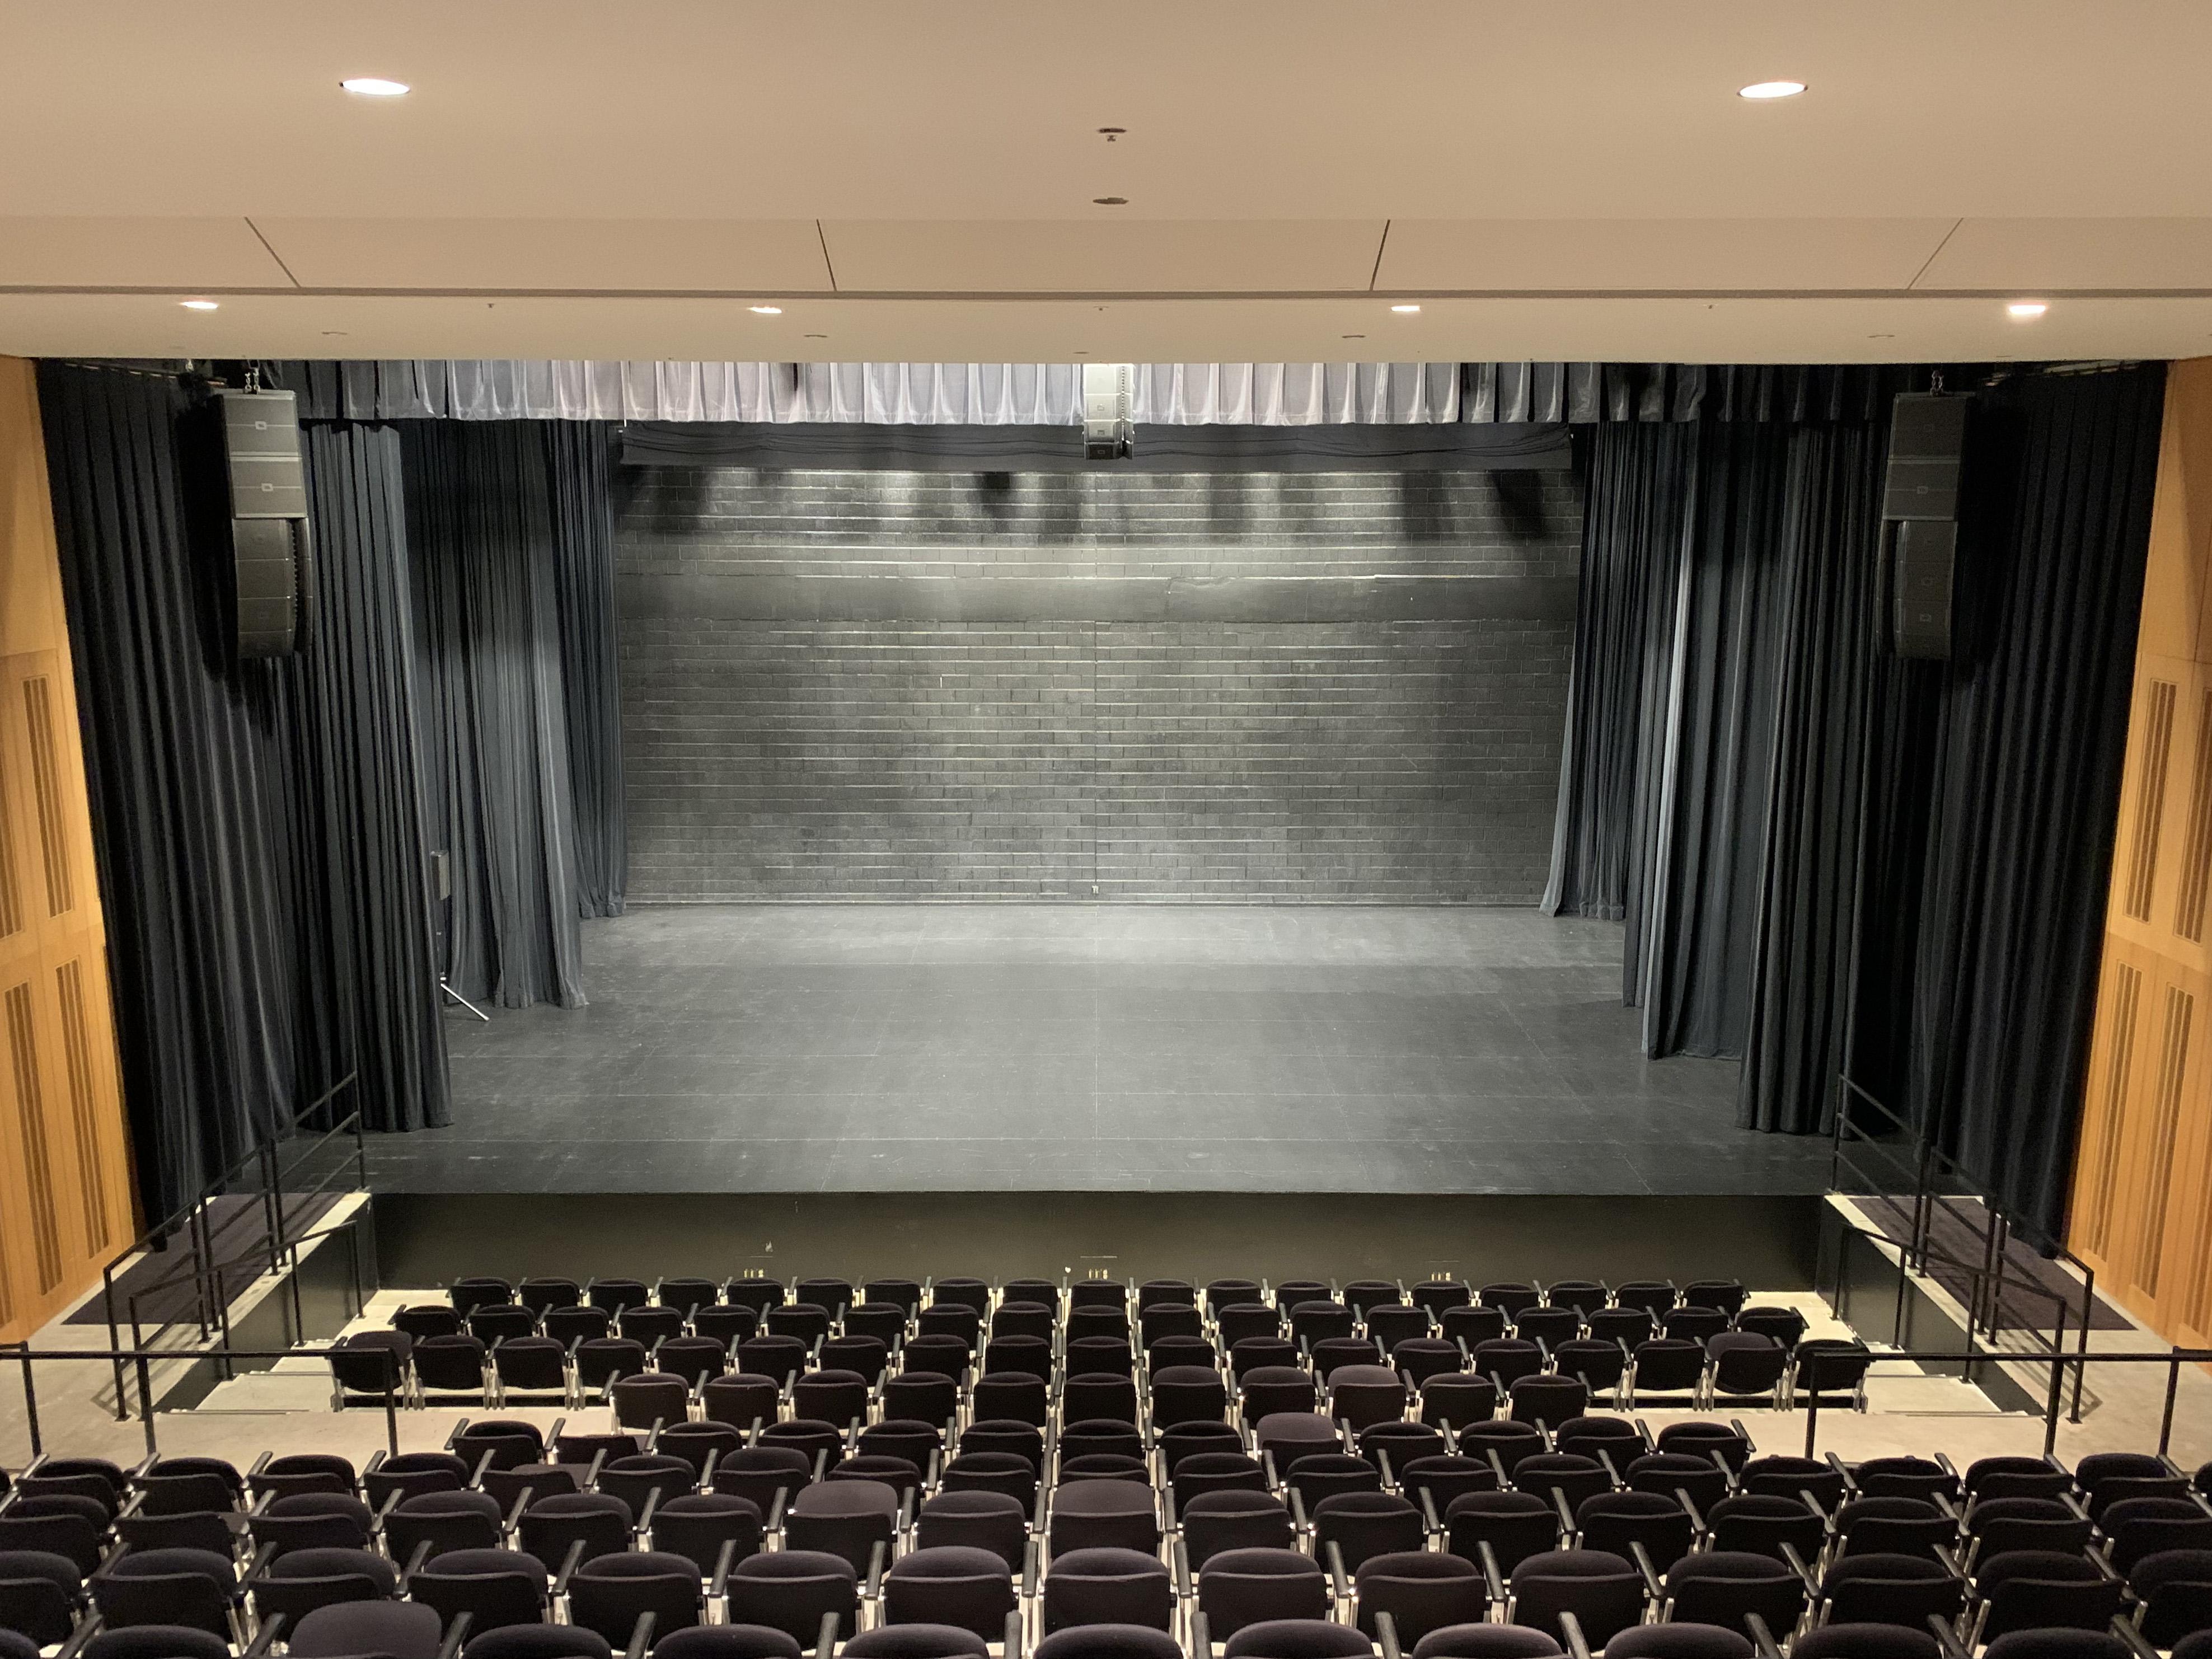 View from back of theater towards an empty, black stage